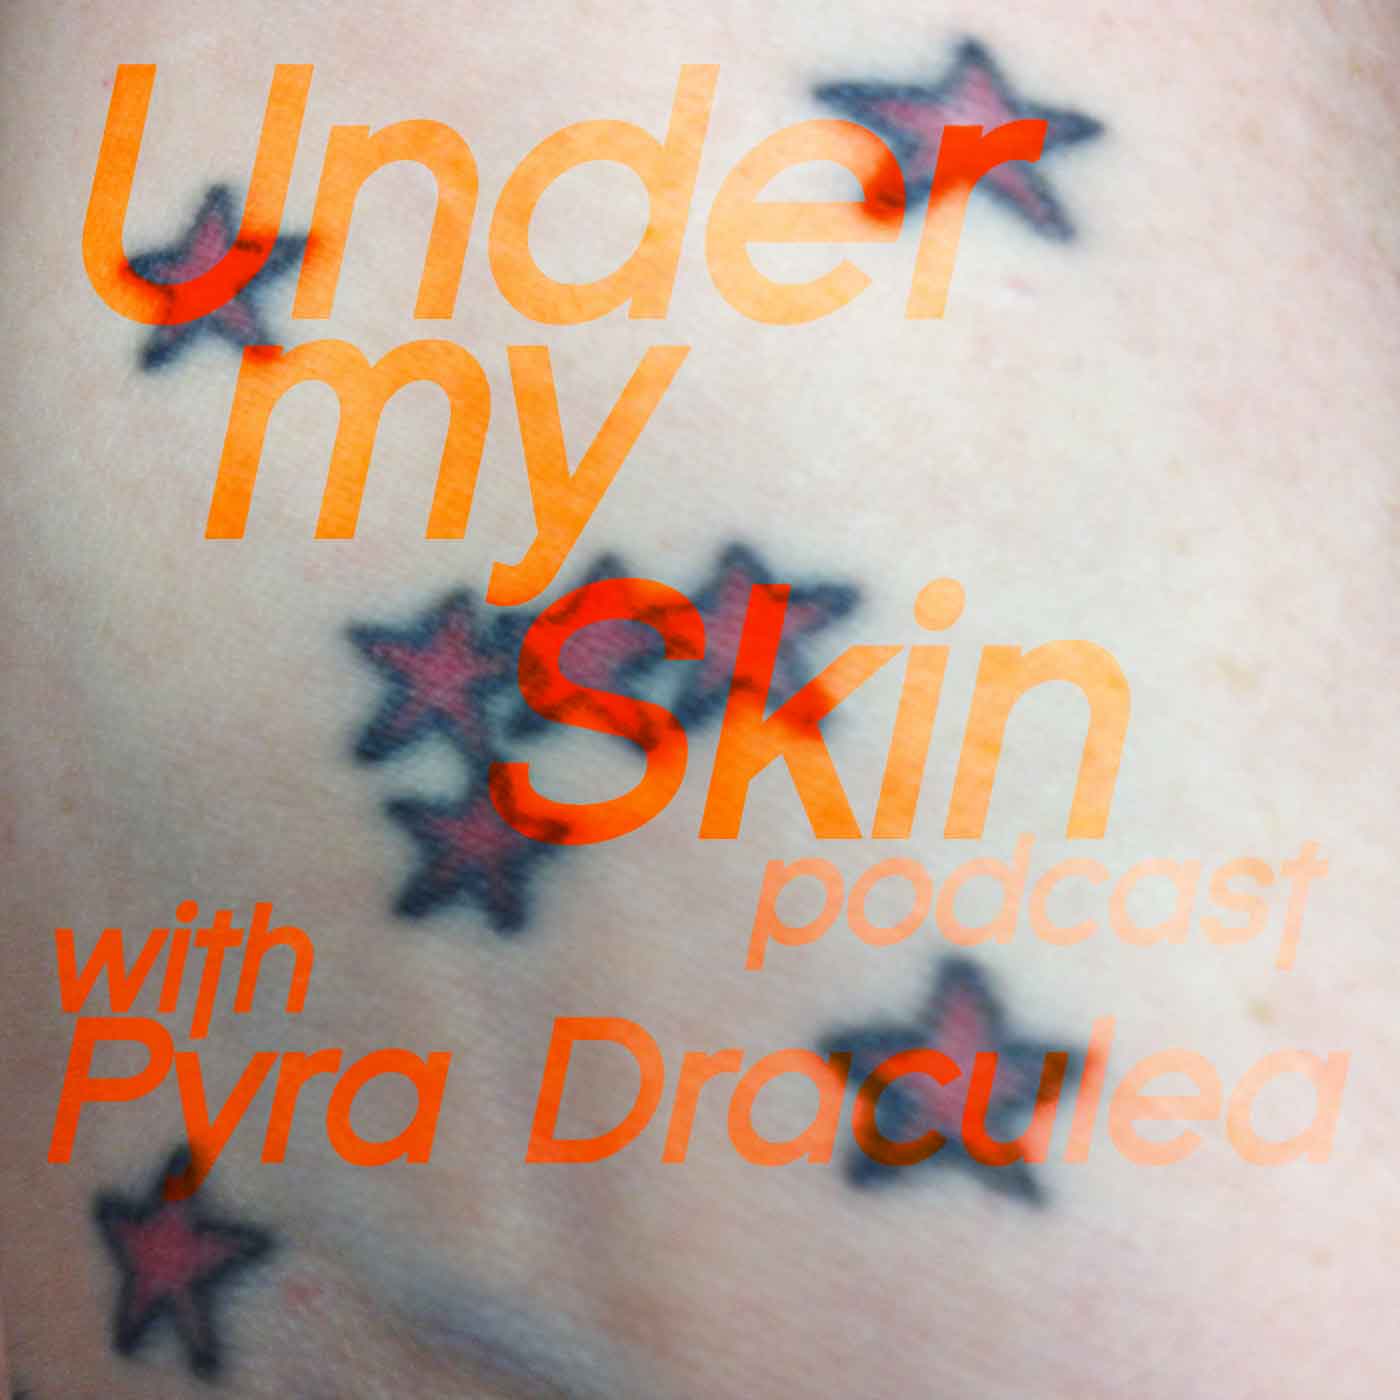 Under My Skin Podcast with Pyra Draculea